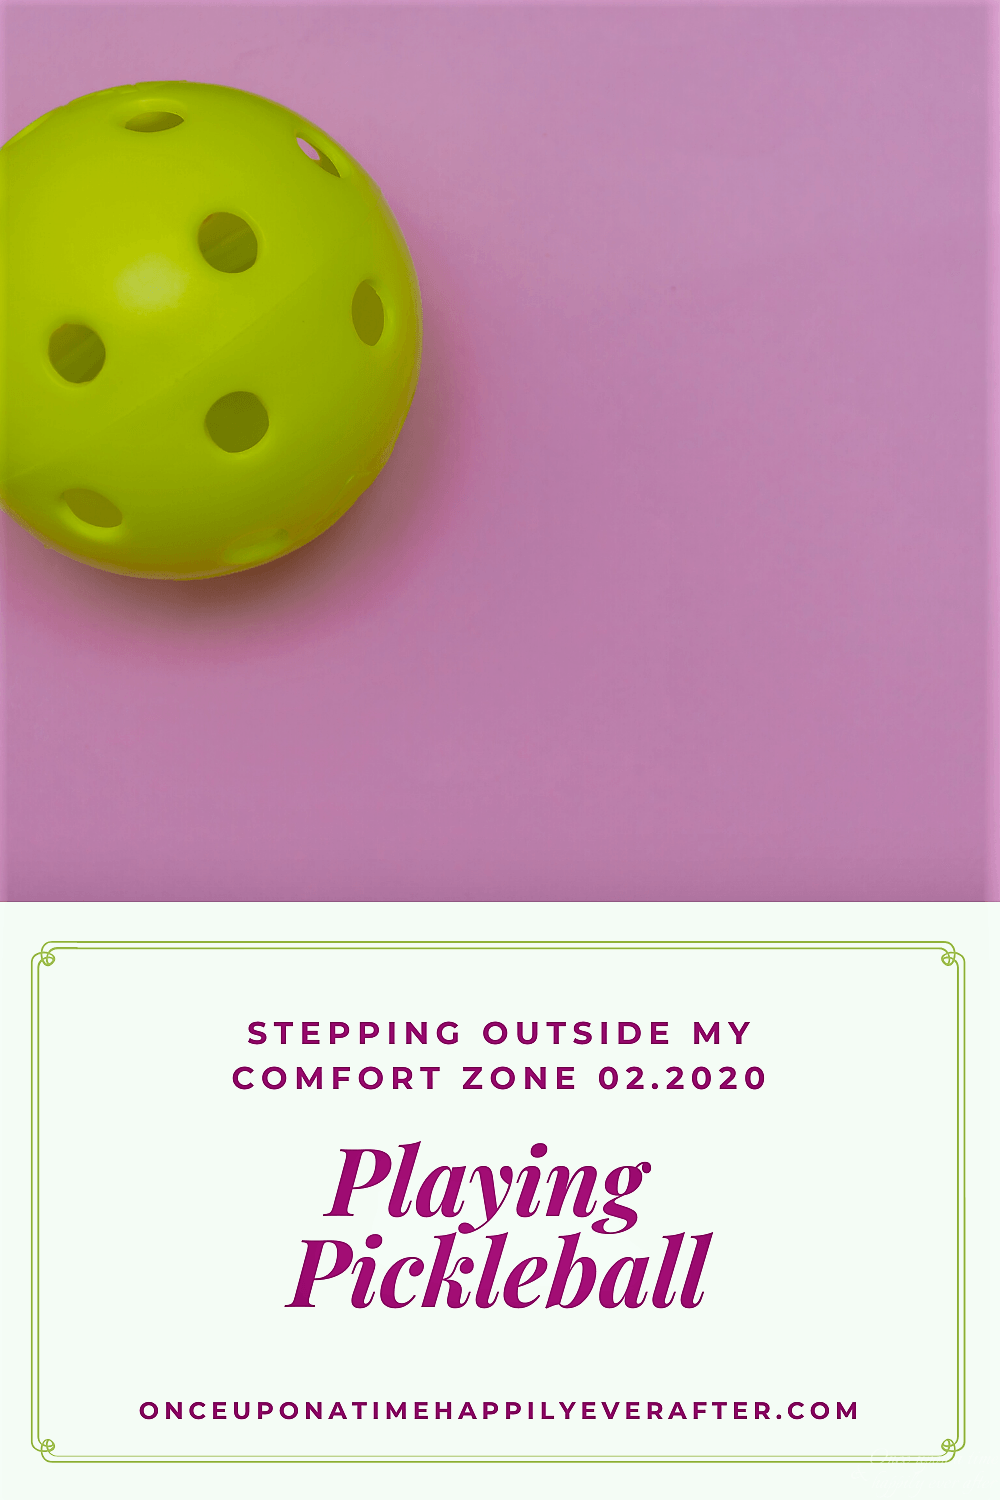 Playing Pickleball: Stepping Outside My Comfort Zone, 02.2020.